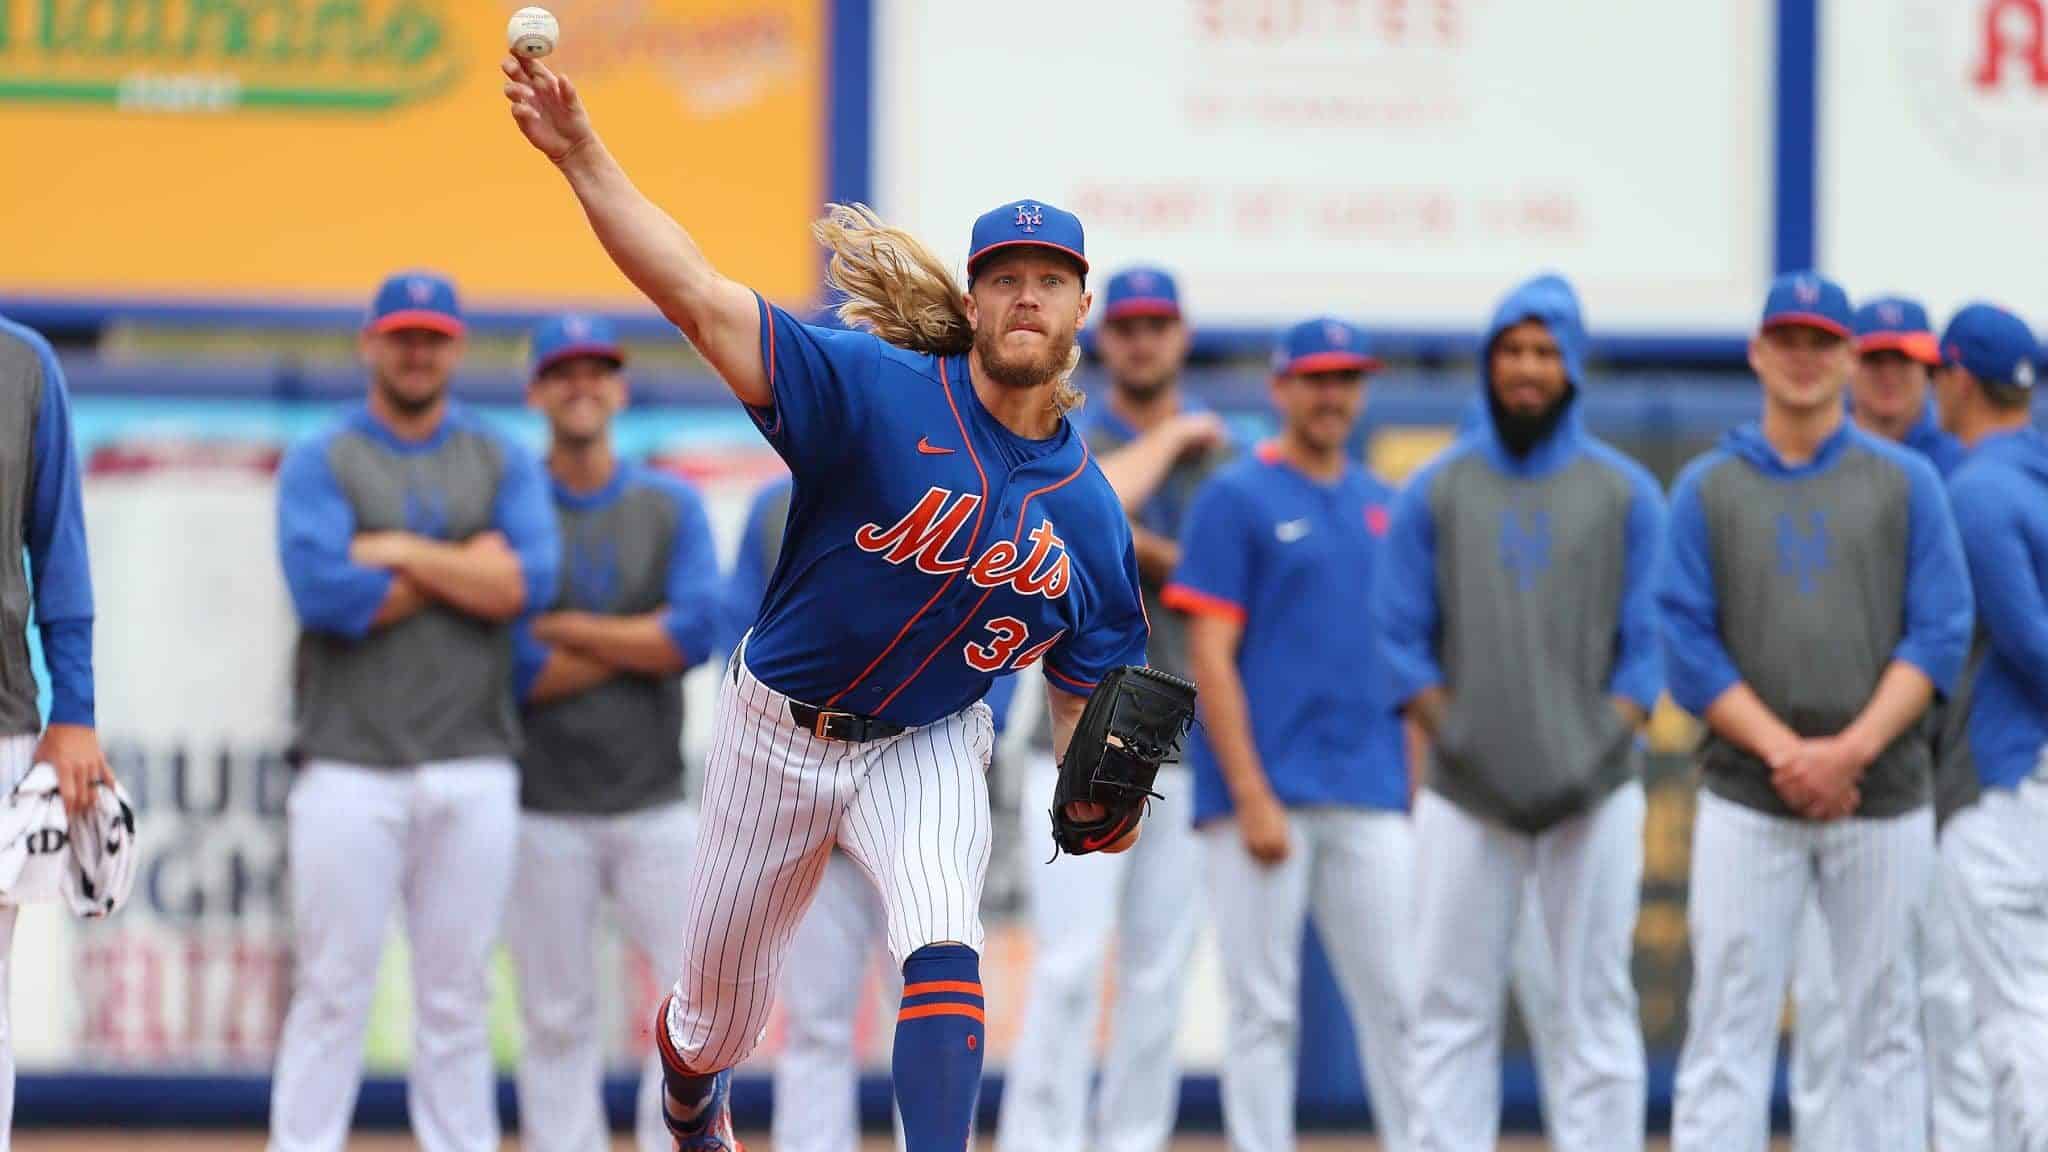 PORT ST. LUCIE, FL - MARCH 08: Pitcher Noah Syndergaard #34 of the New York Mets warms up in the bullpen in front of his fellow pitches before a spring training baseball game against the Houston Astros at Clover Park on March 8, 2020 in Port St. Lucie, Florida. The Mets defeated the Astros 3-1.